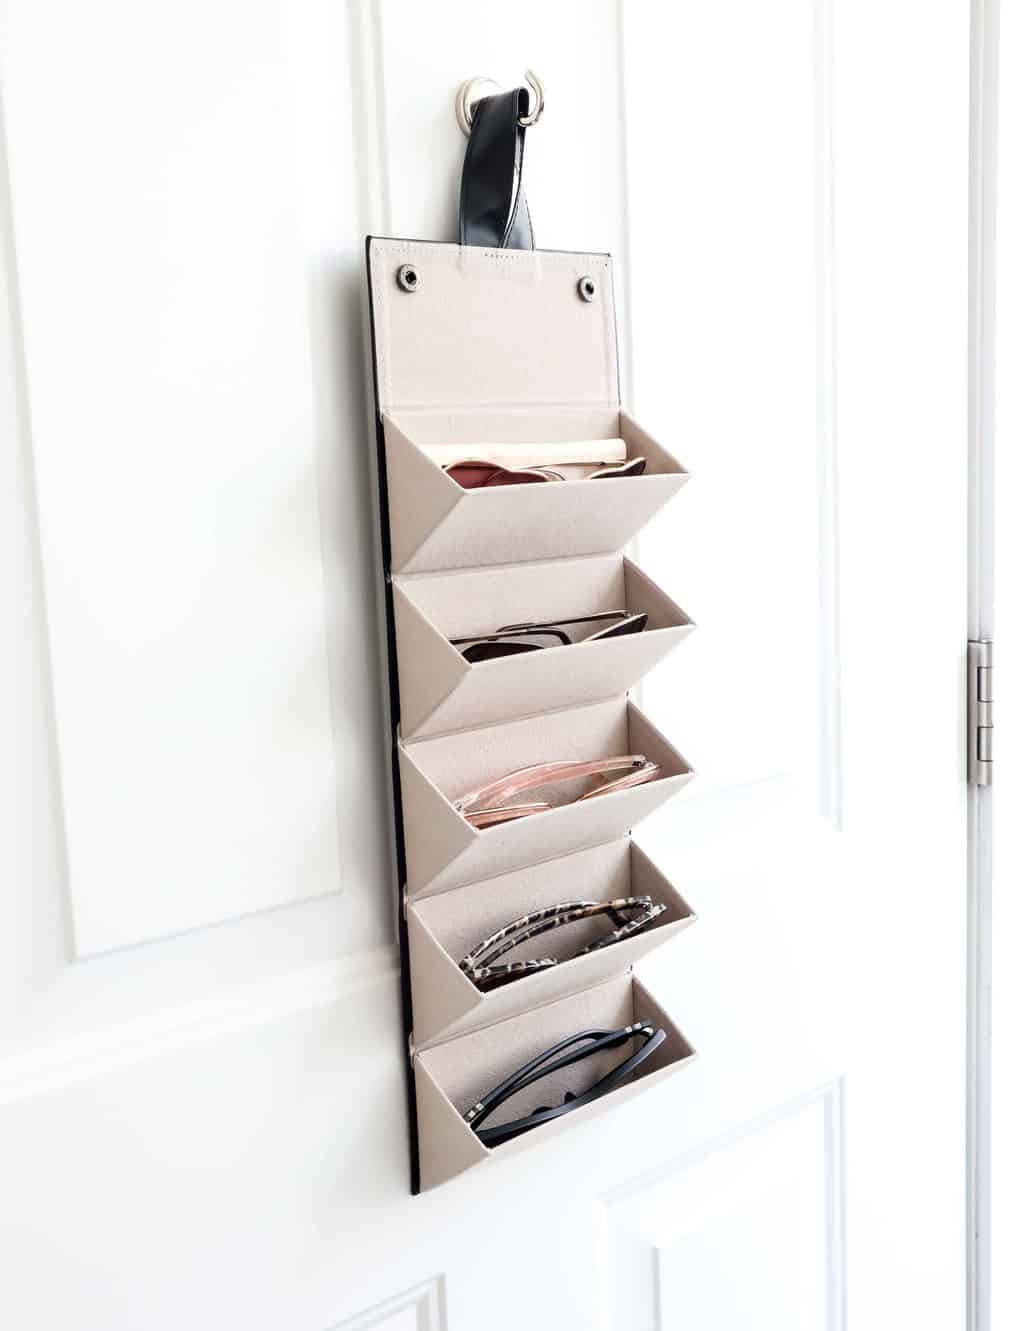 13 Creative Ways to Store Your Sunglasses to Keep Them In Good Condition